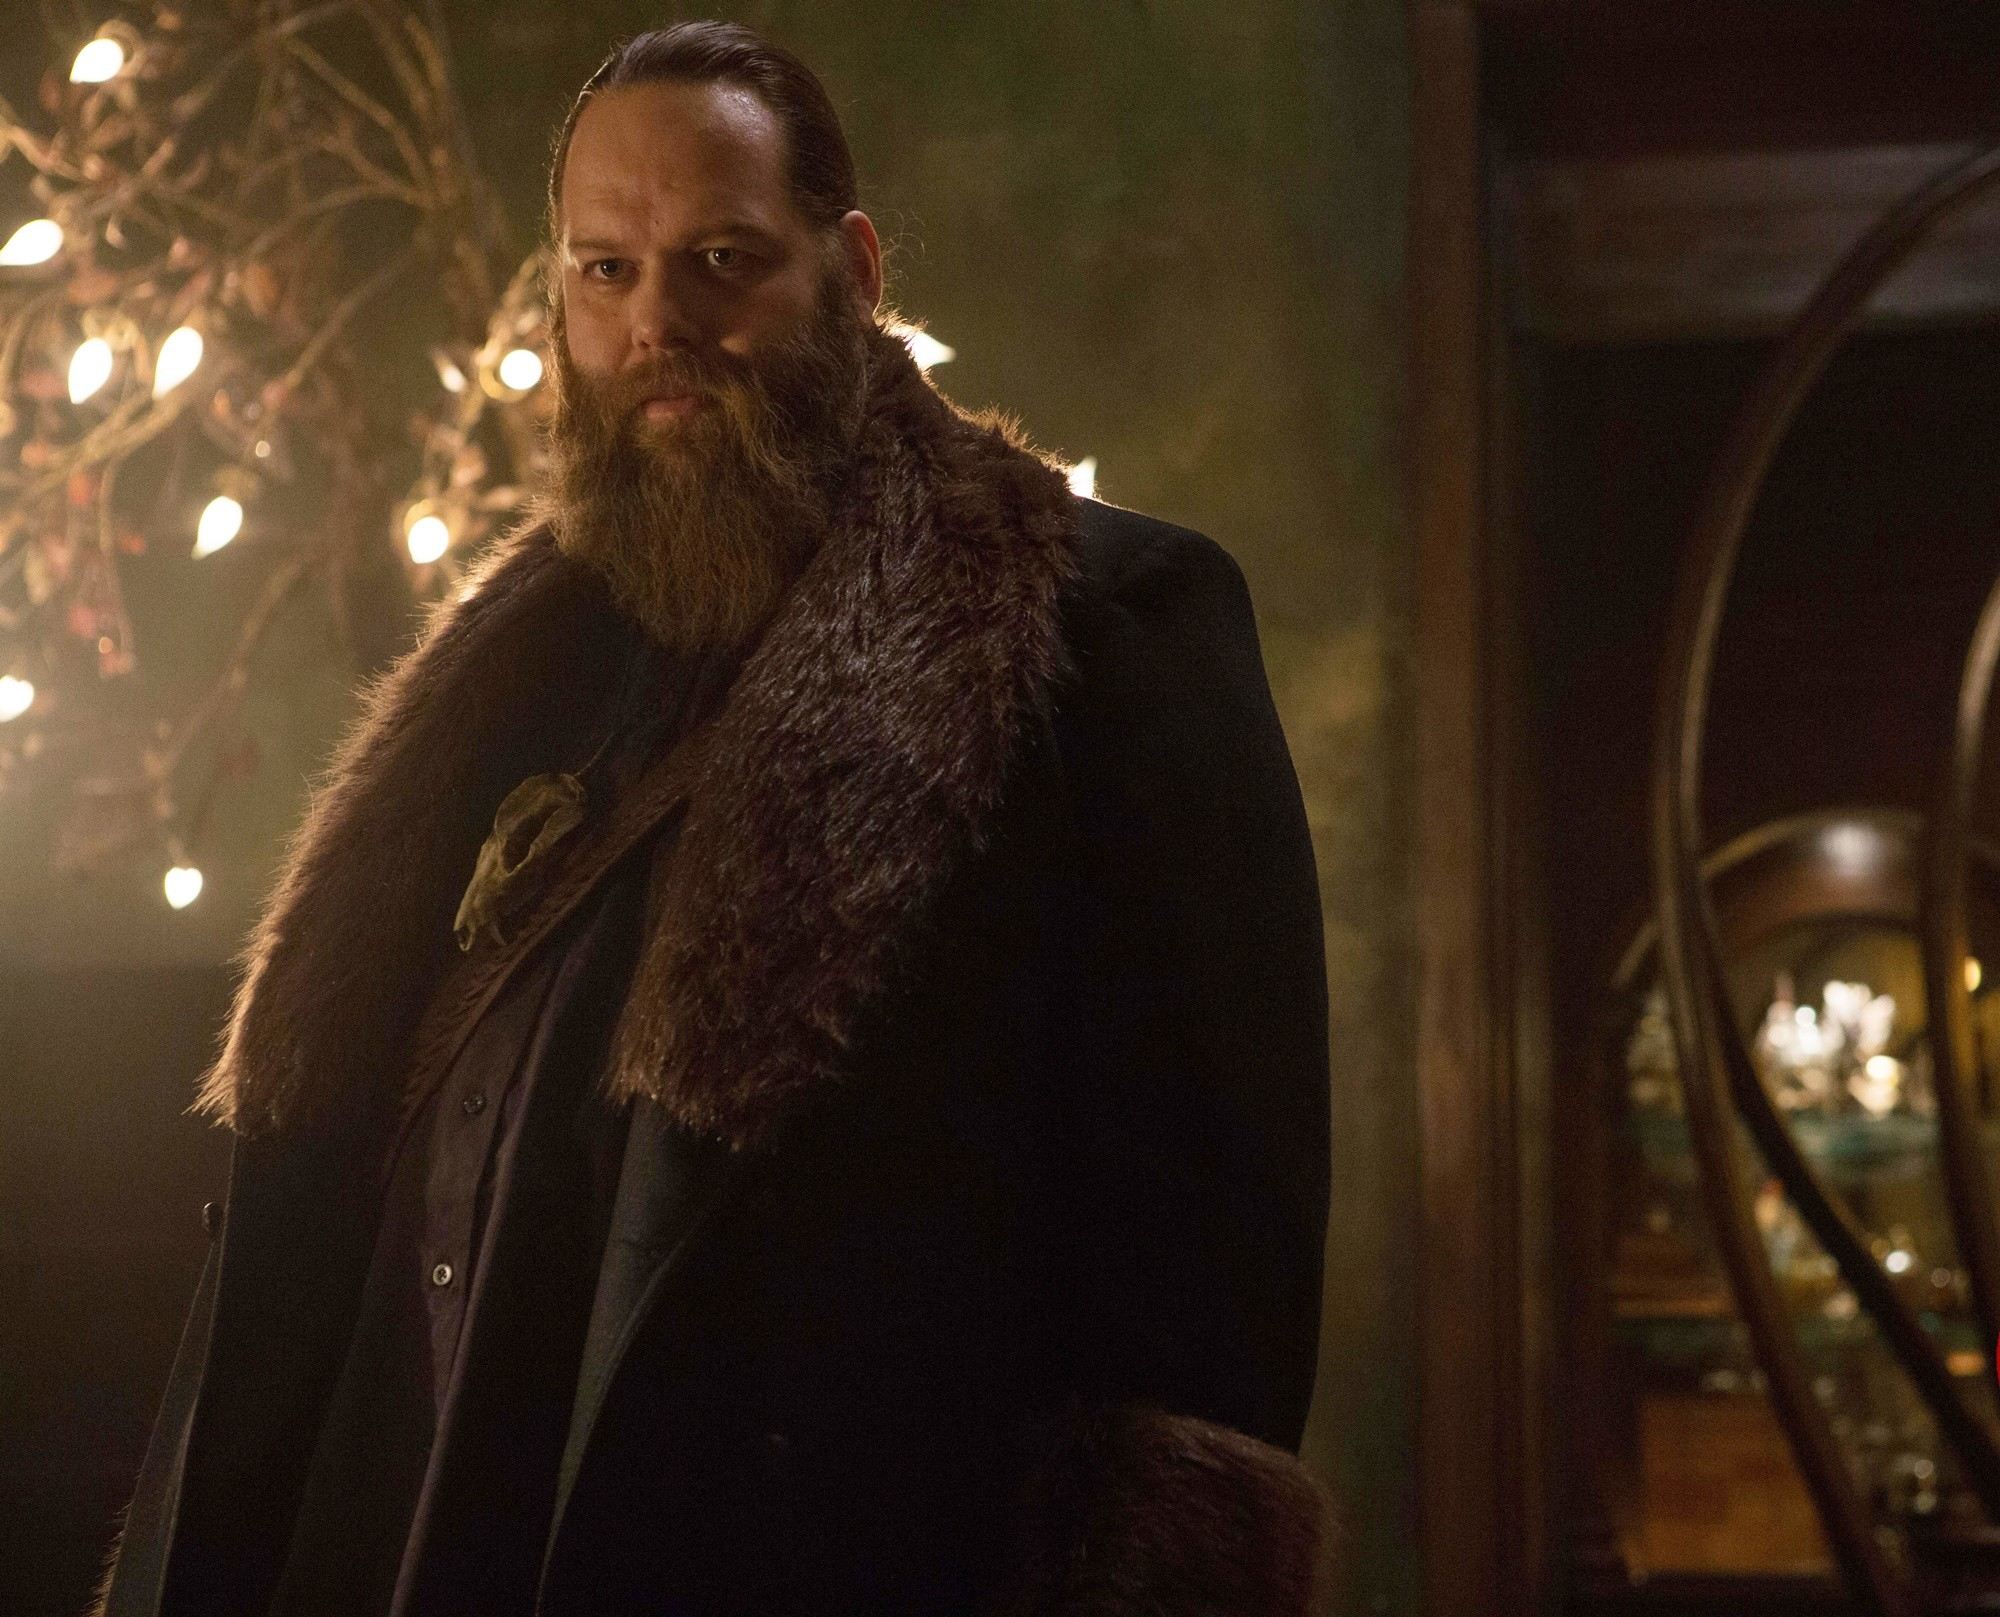 Olafur Darri Olafsson stars as Belial in Summit Entertainment's The Last Witch Hunter (2015)